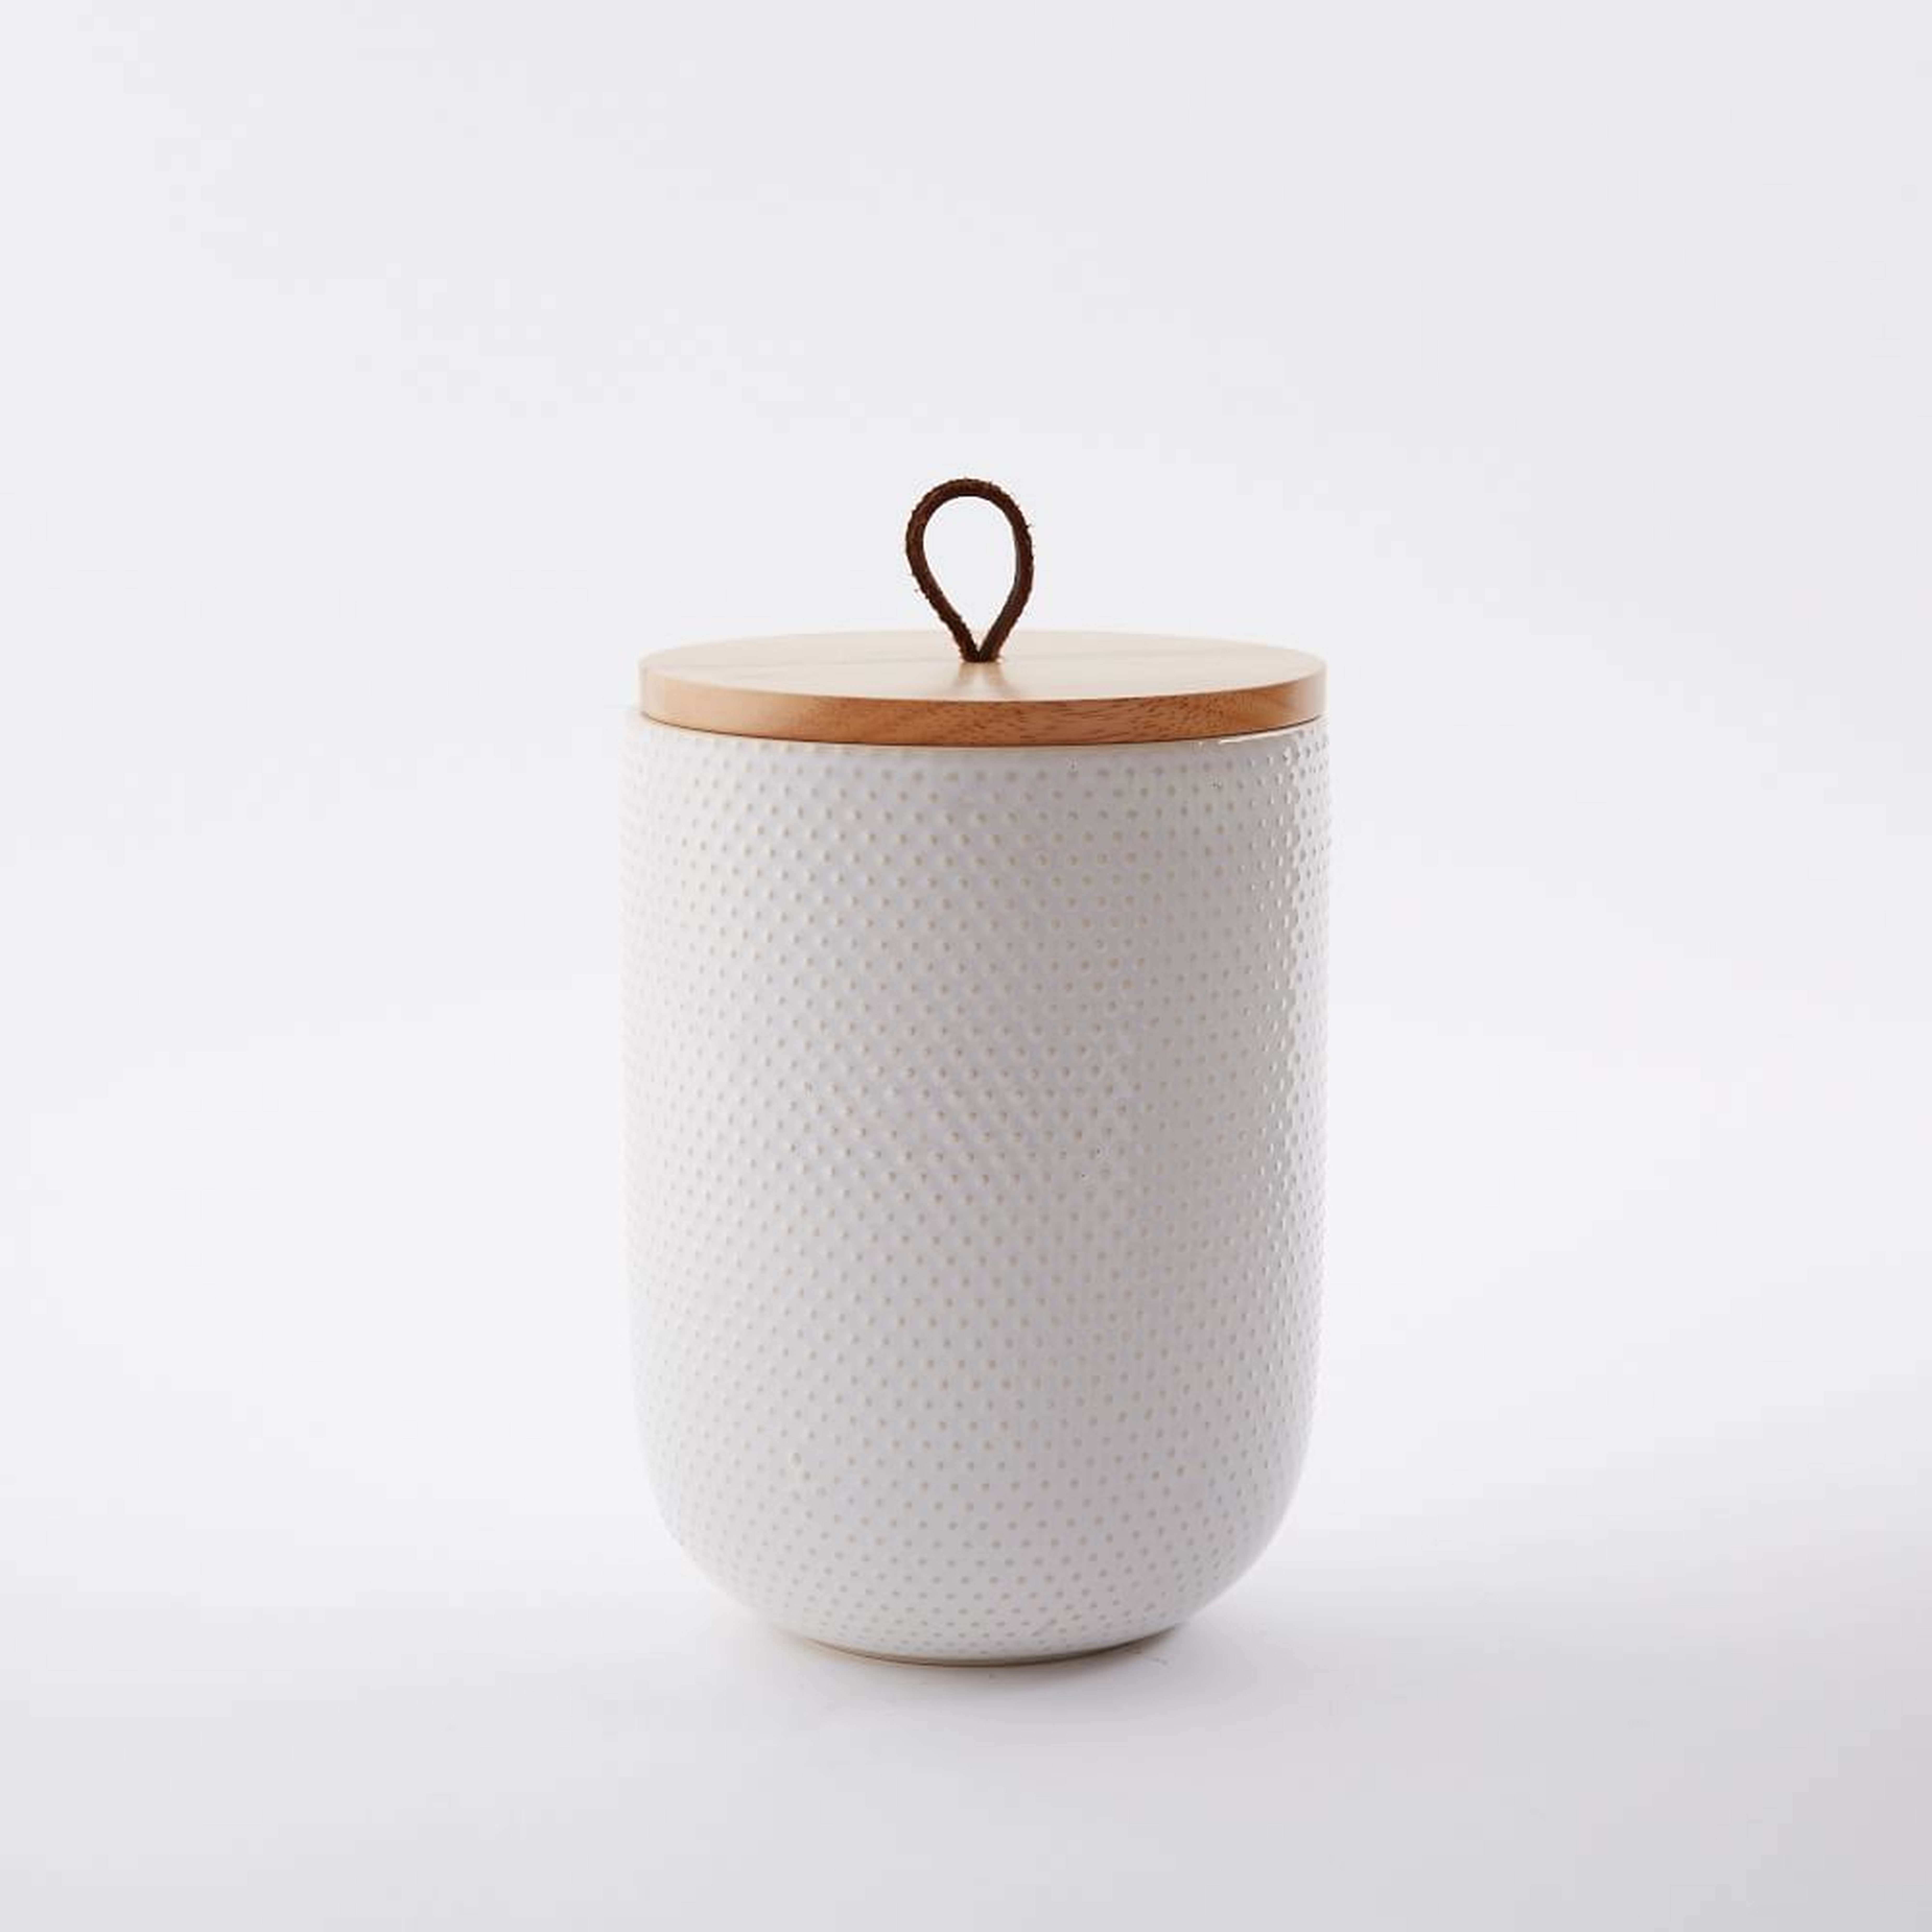 Textured Kitchen Cannister, Tall, White Dots - West Elm